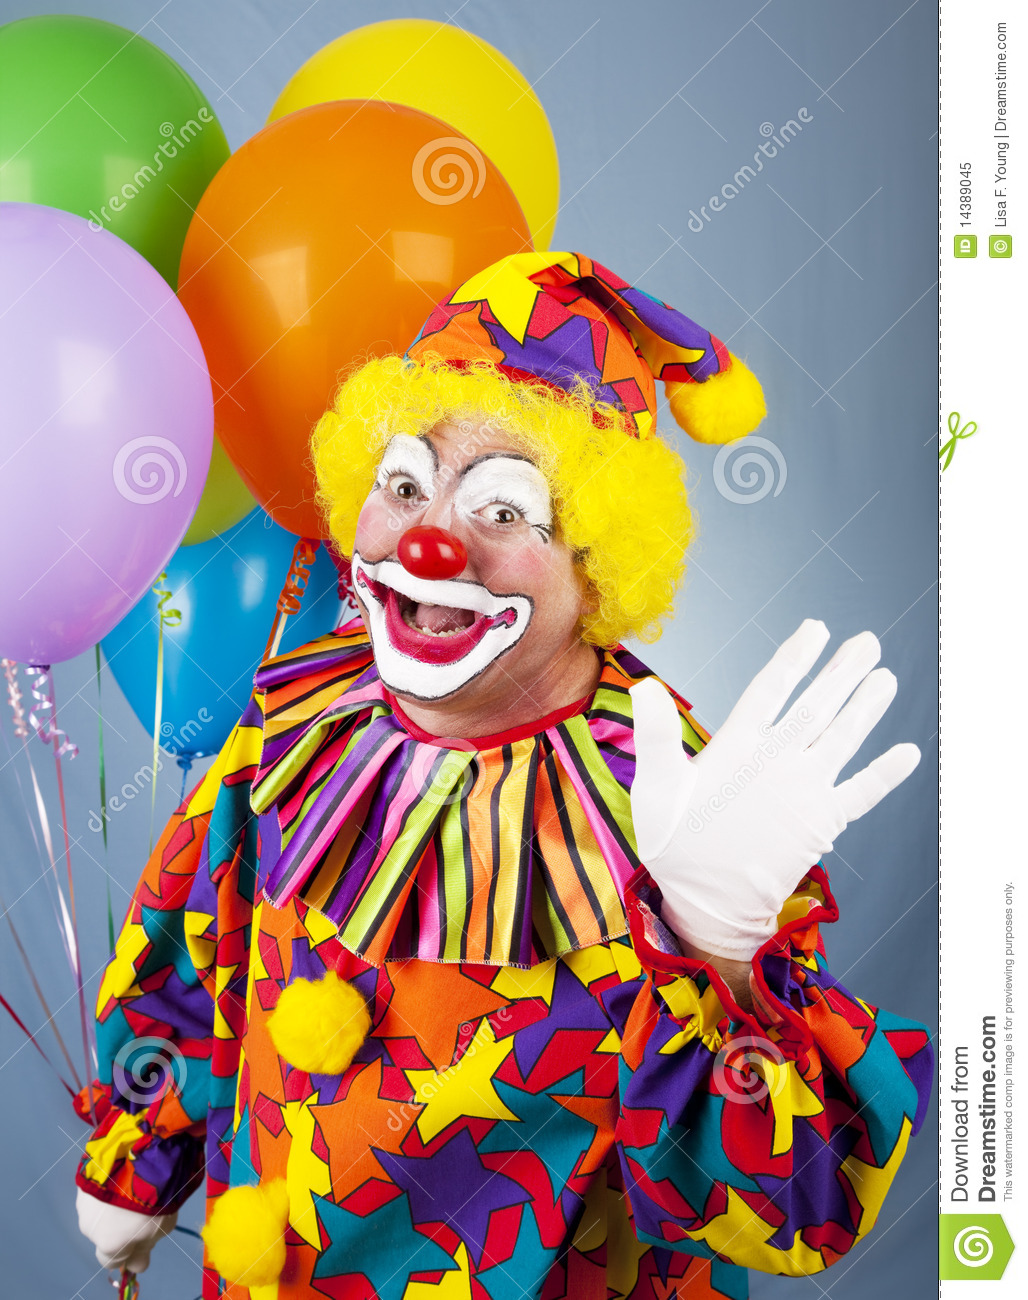 Friendly Circus Clown Holding A Bunch Of Balloons And Waving Hello